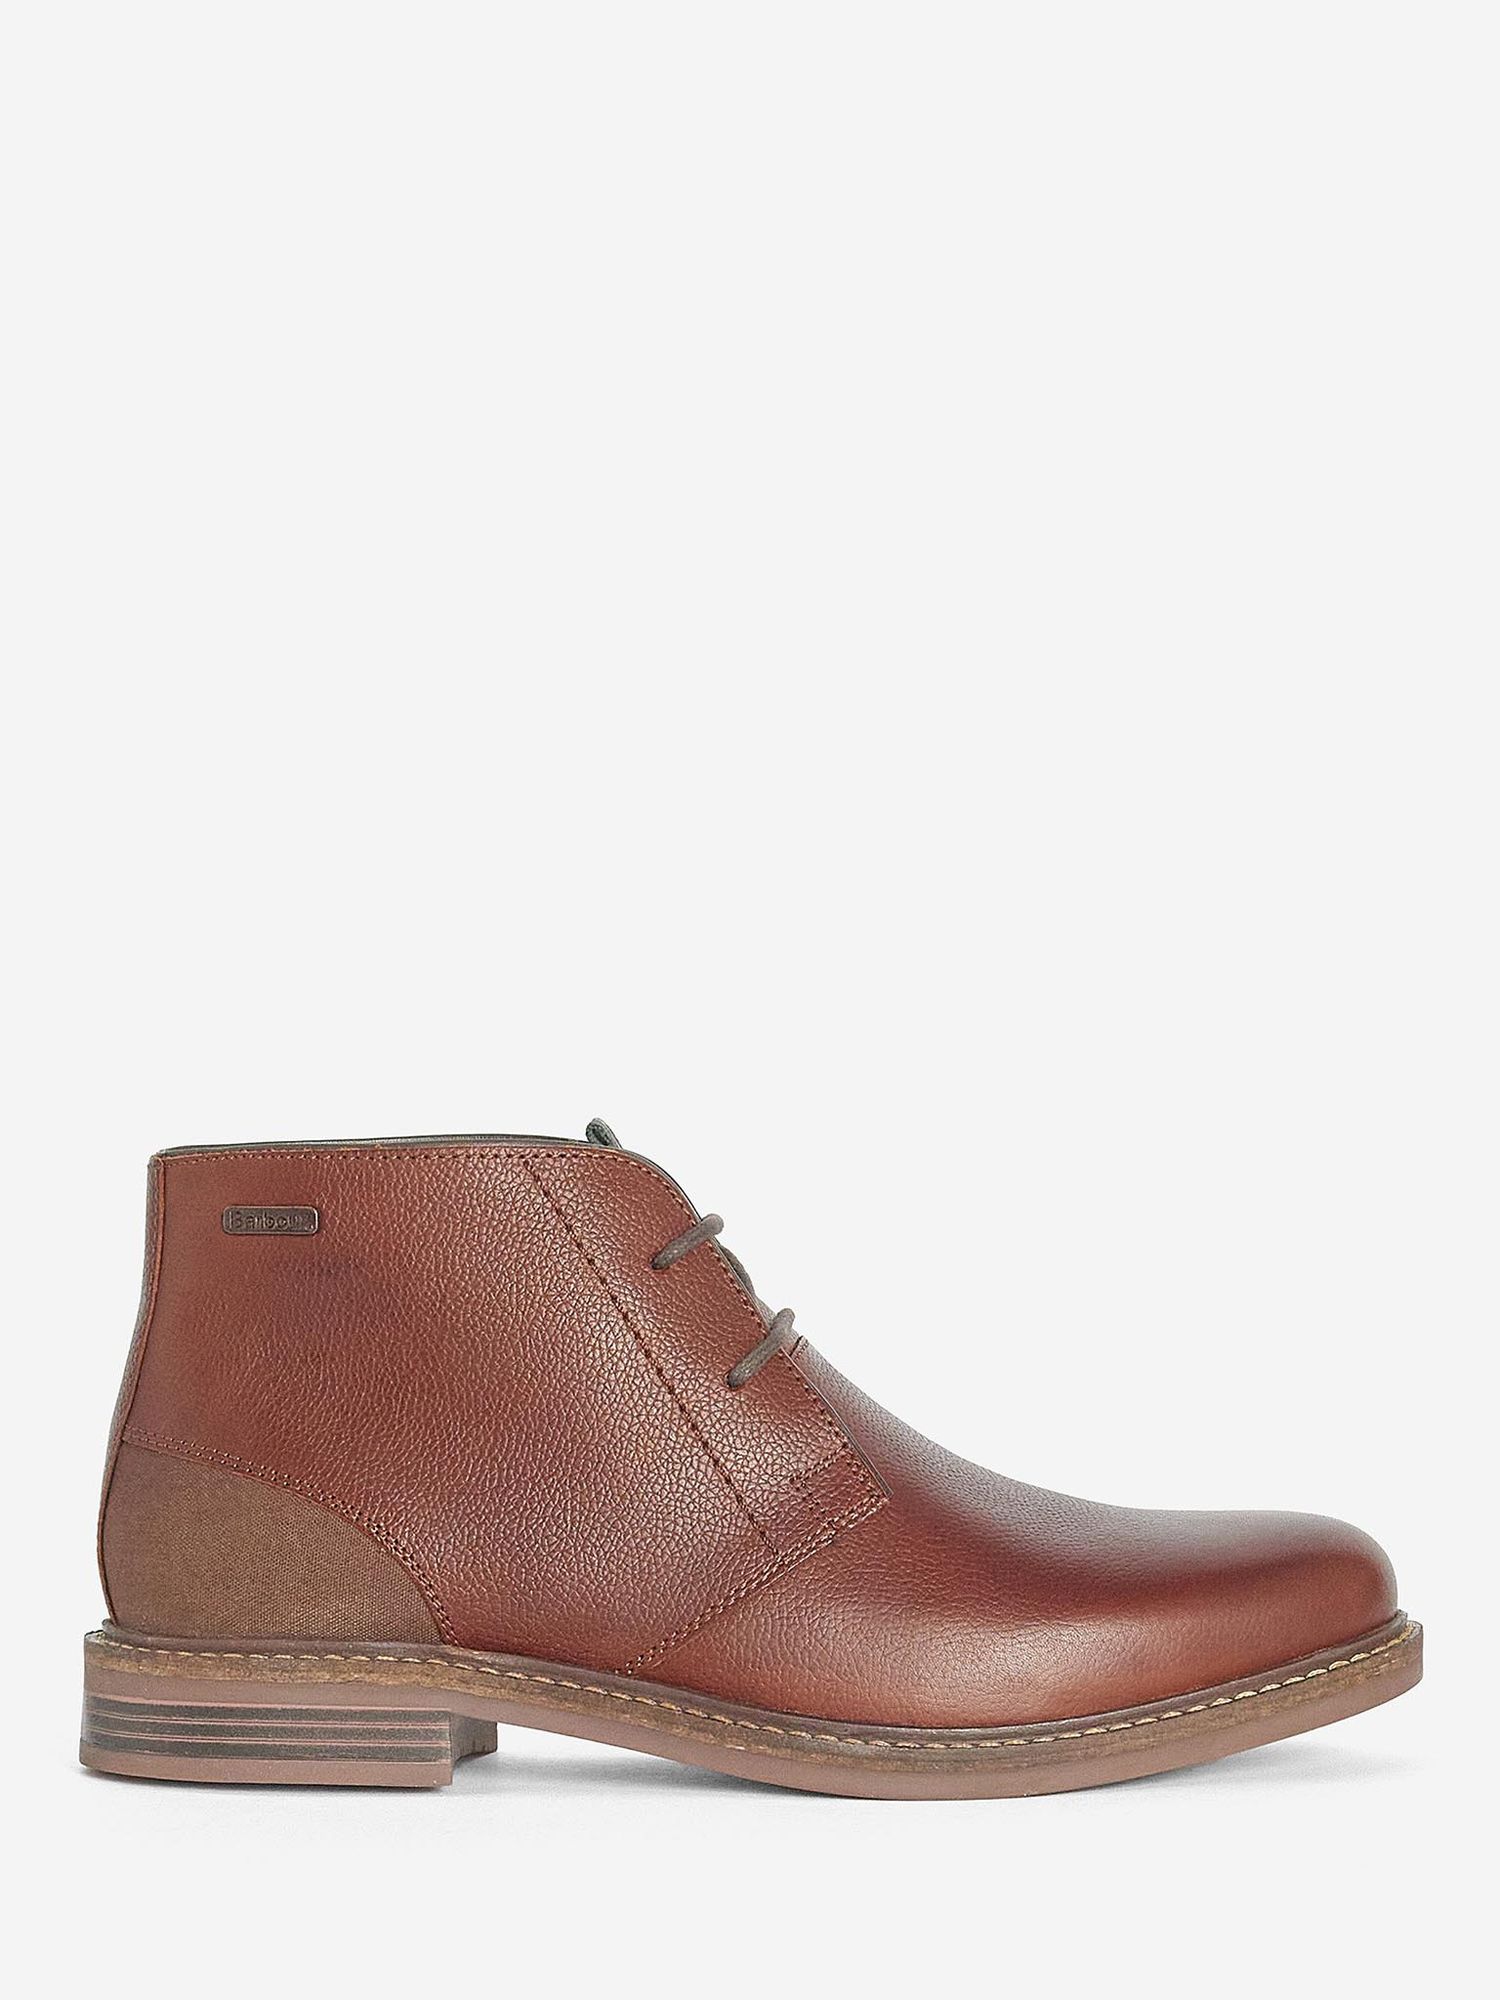 Barbour Redhead Suede Chukka Boots, Teak